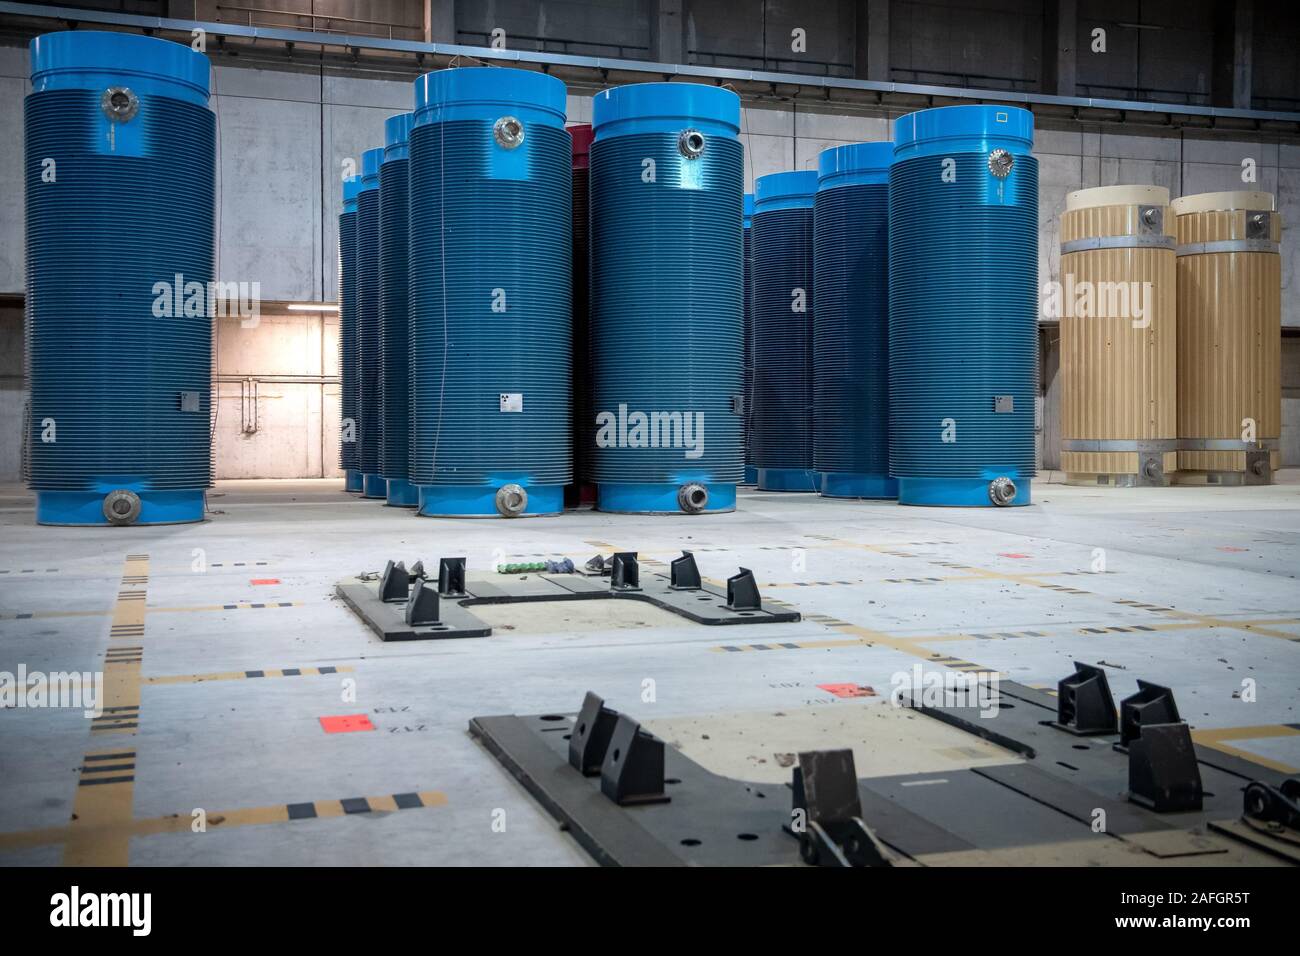 11 December 2019, Lower Saxony, Gorleben: Containers with high-level radioactive waste are in interim storage. The Gorleben nuclear waste storage facility is an interim storage facility for spent fuel elements and high-level radioactive waste. To date, 13 Castor transports with highly radioactive material have reached the transport container warehouse between 1995 and 2011. Until a repository has been found, the nuclear waste is to be temporarily stored there. Photo: Sina Schuldt/dpa Stock Photo